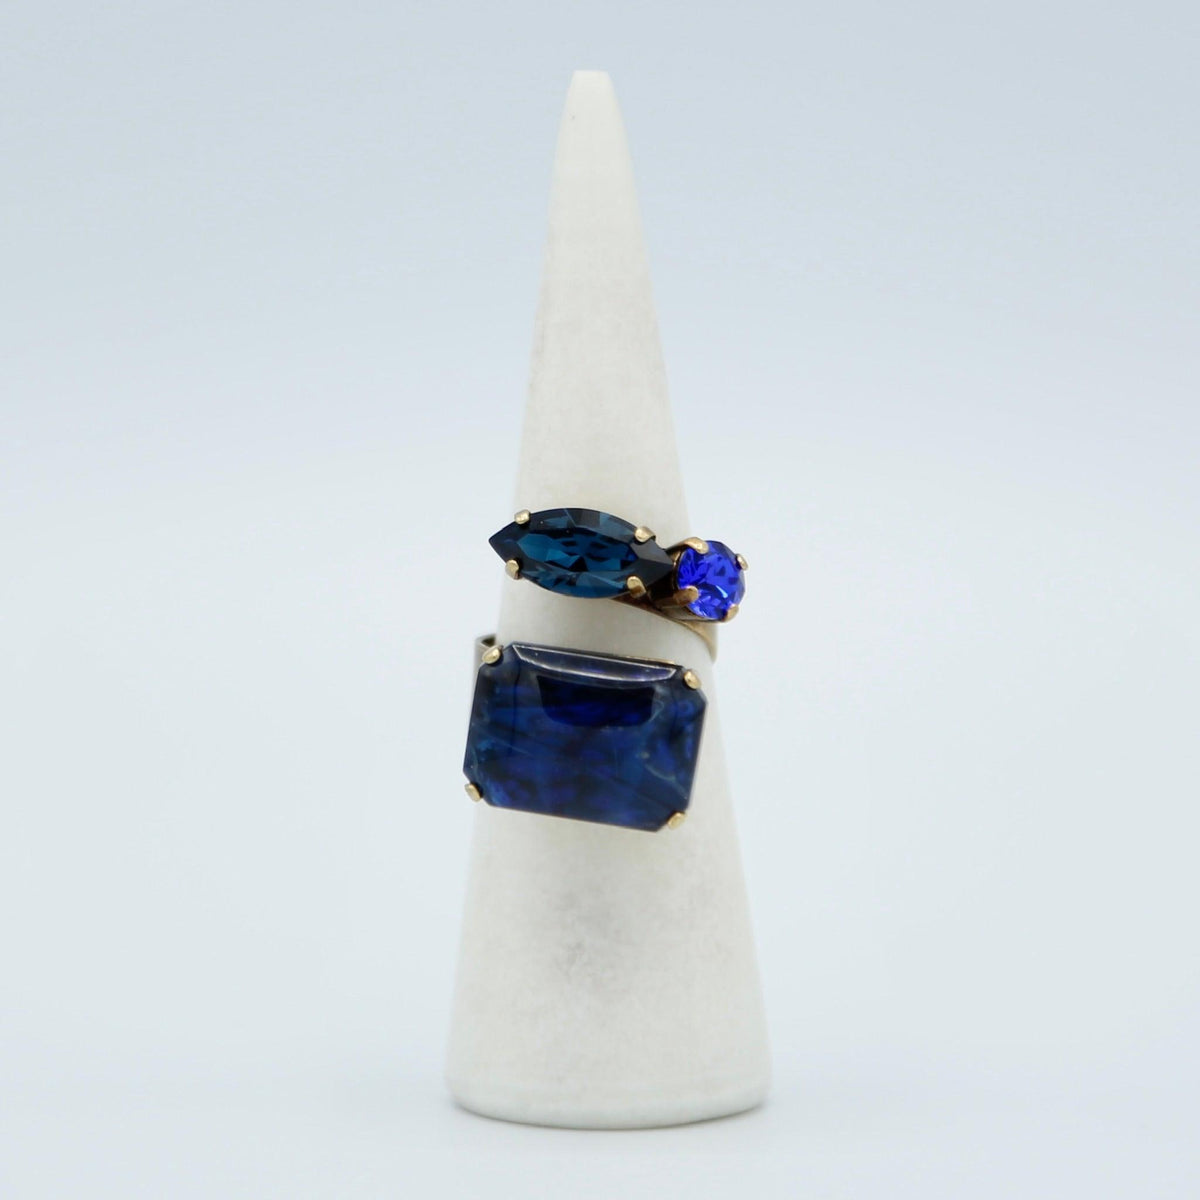 Blue Nature Ring with Glass Stones - Vita Isola